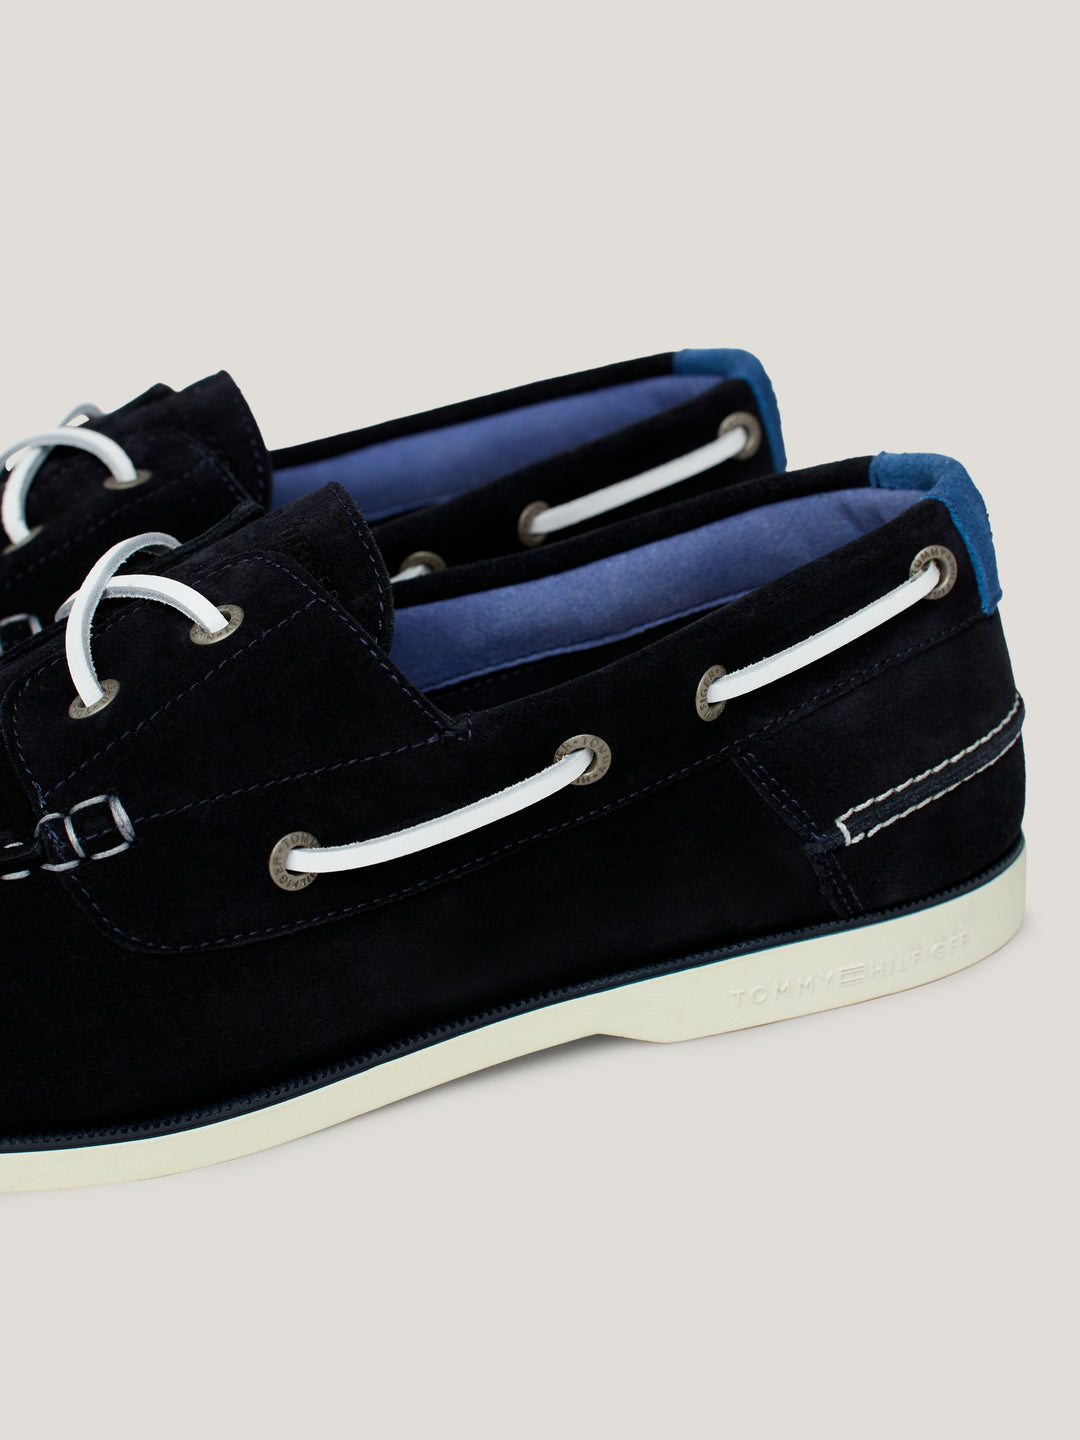 TH BOAT SHOE CORE SUEDE - NAVY/BLUE